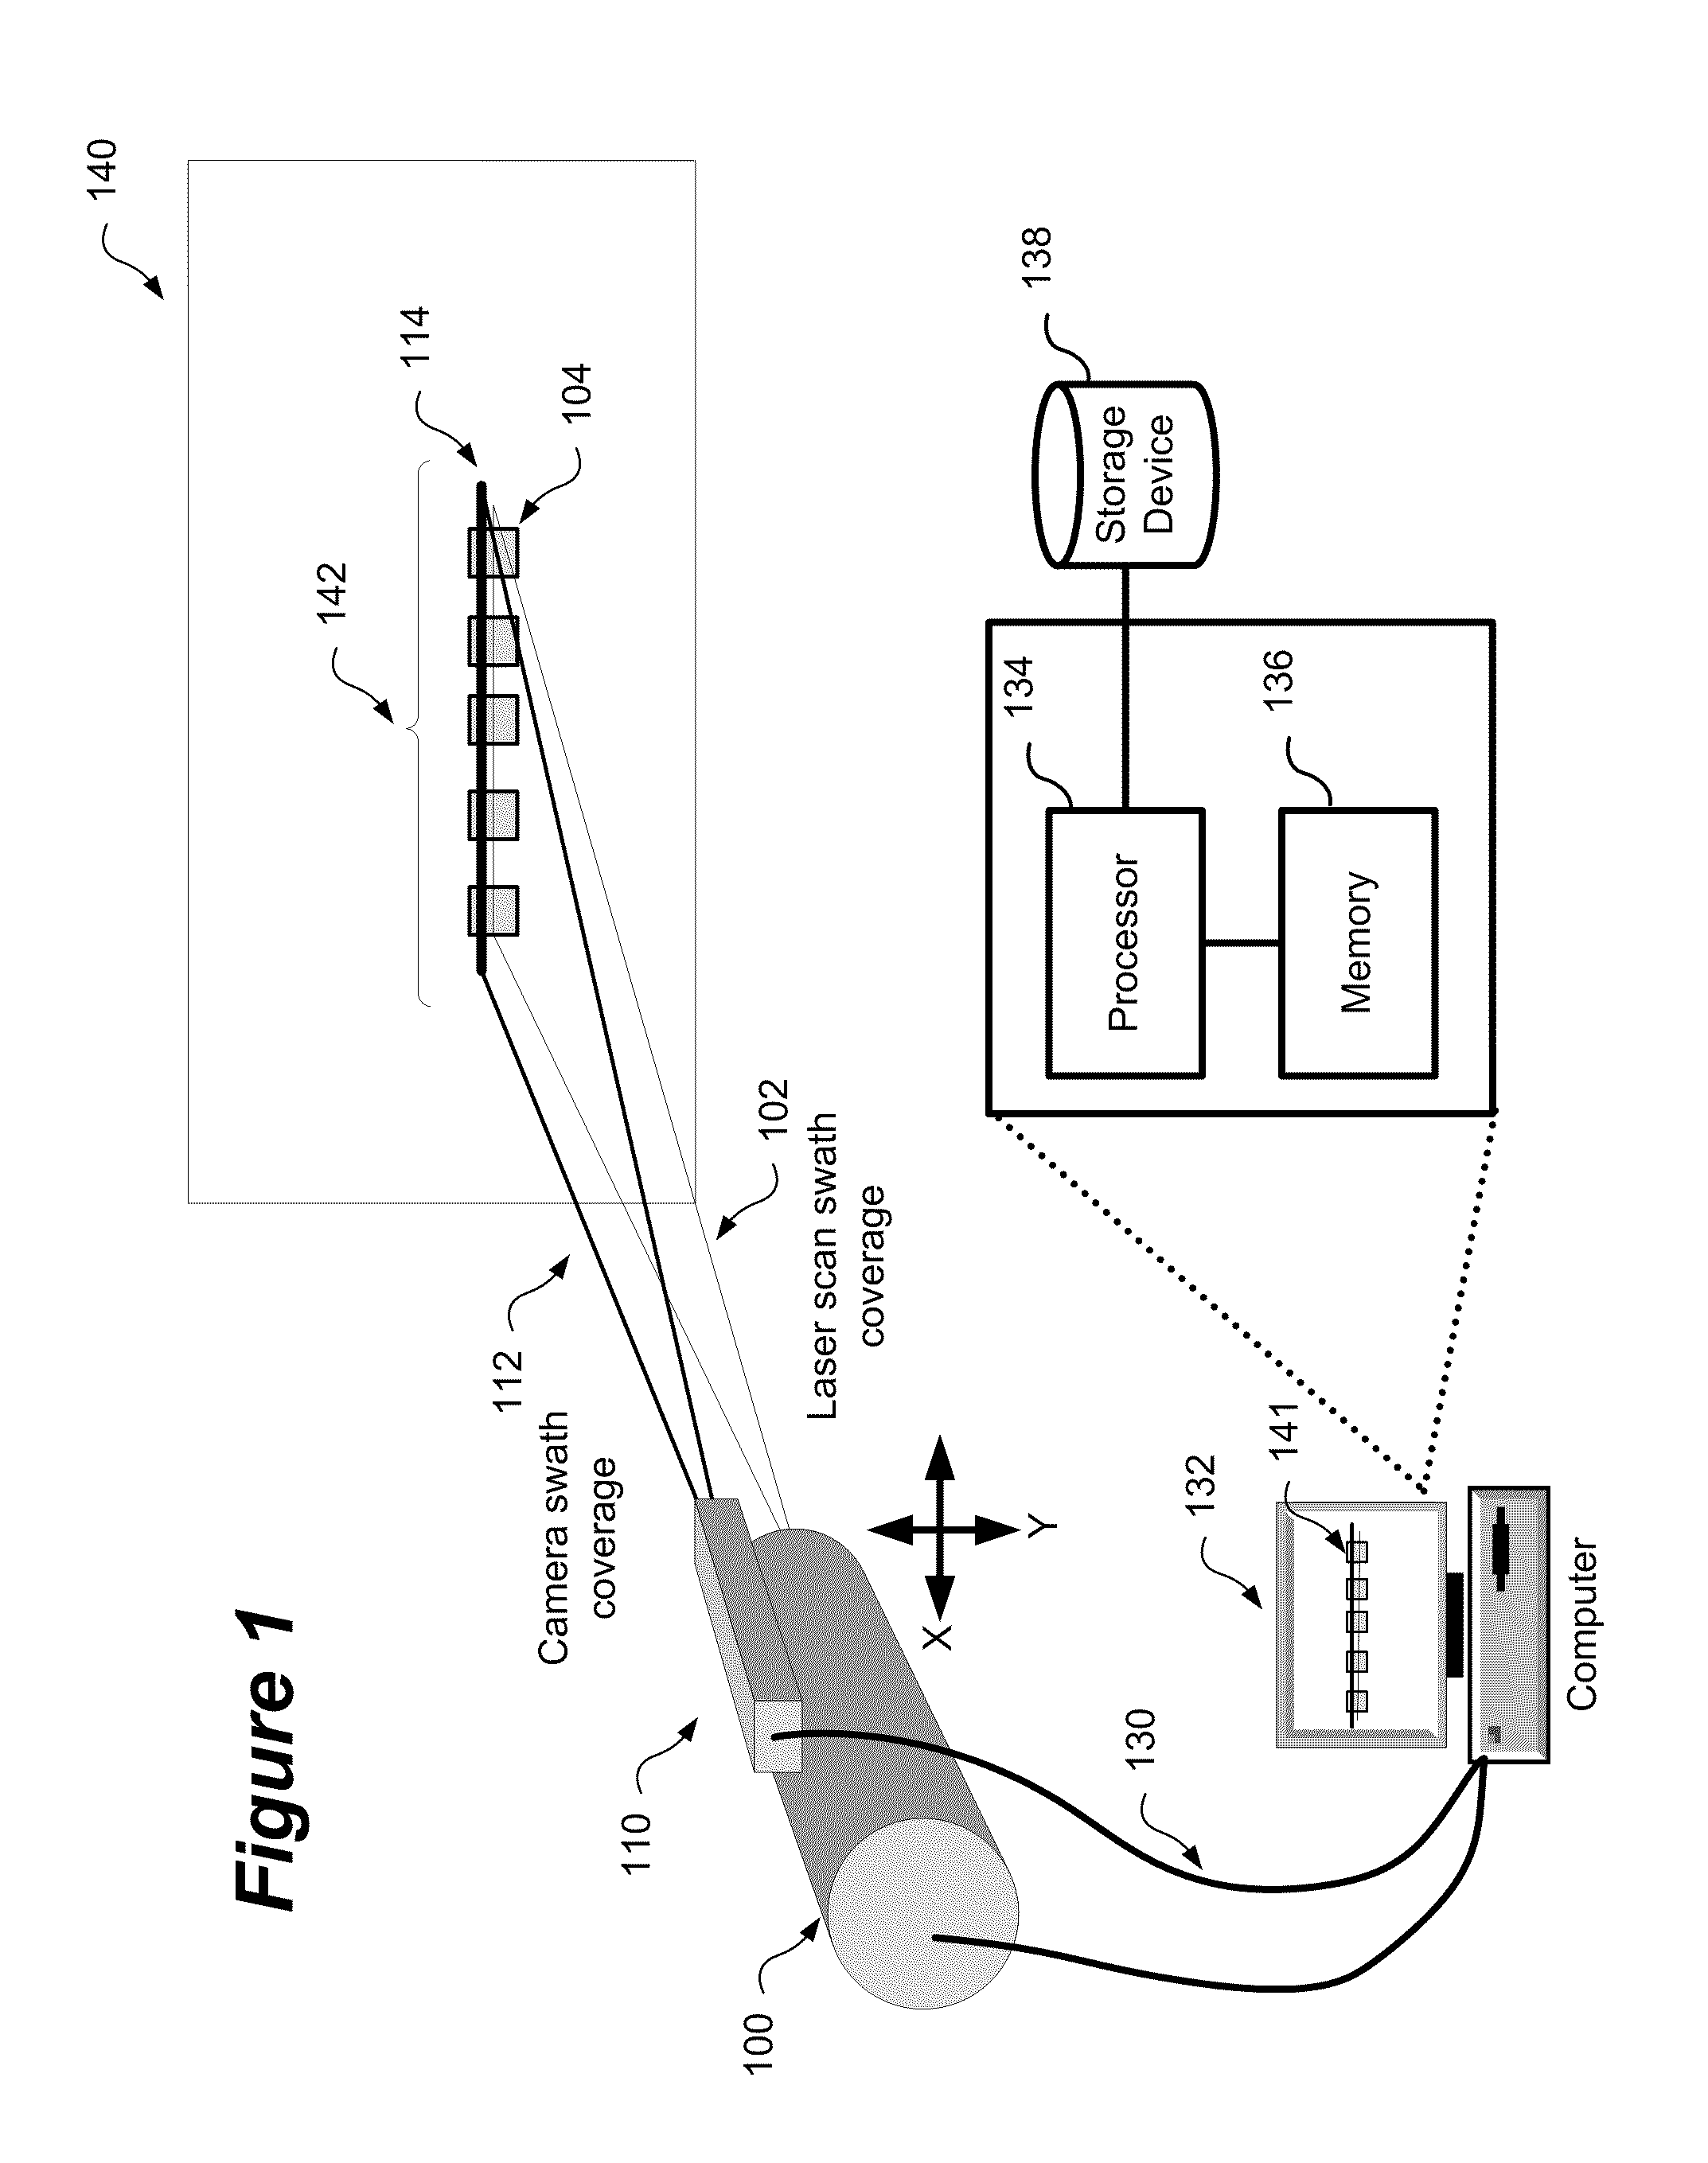 Method and system for aligning a line scan camera with a lidar scanner for real time data fusion in three dimensions